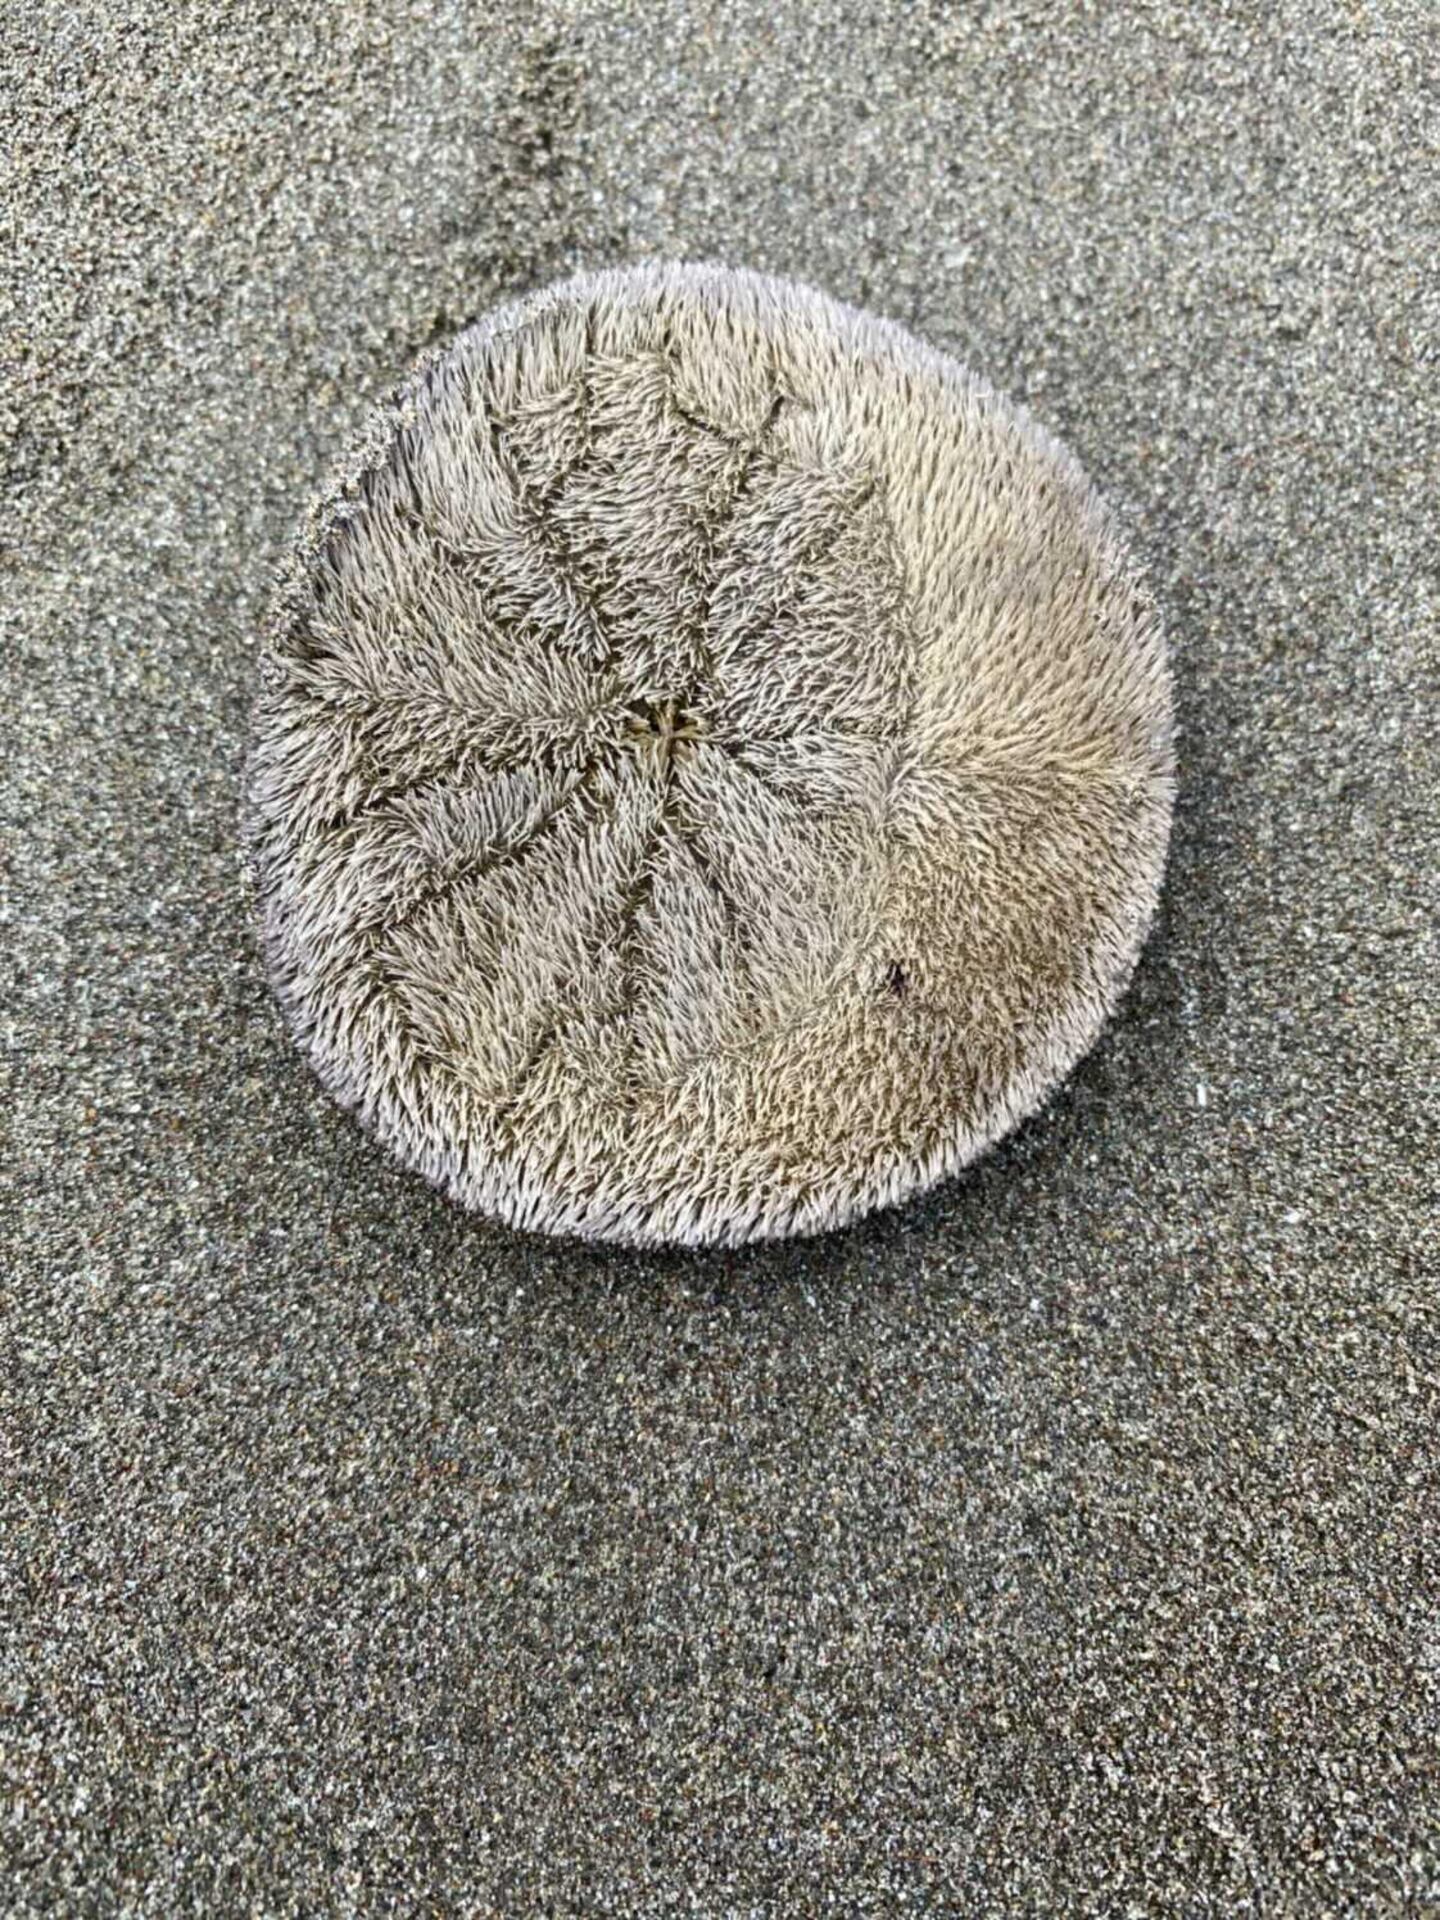 Thousands of sand dollars stranded by tide on Oregon Coast 'drying